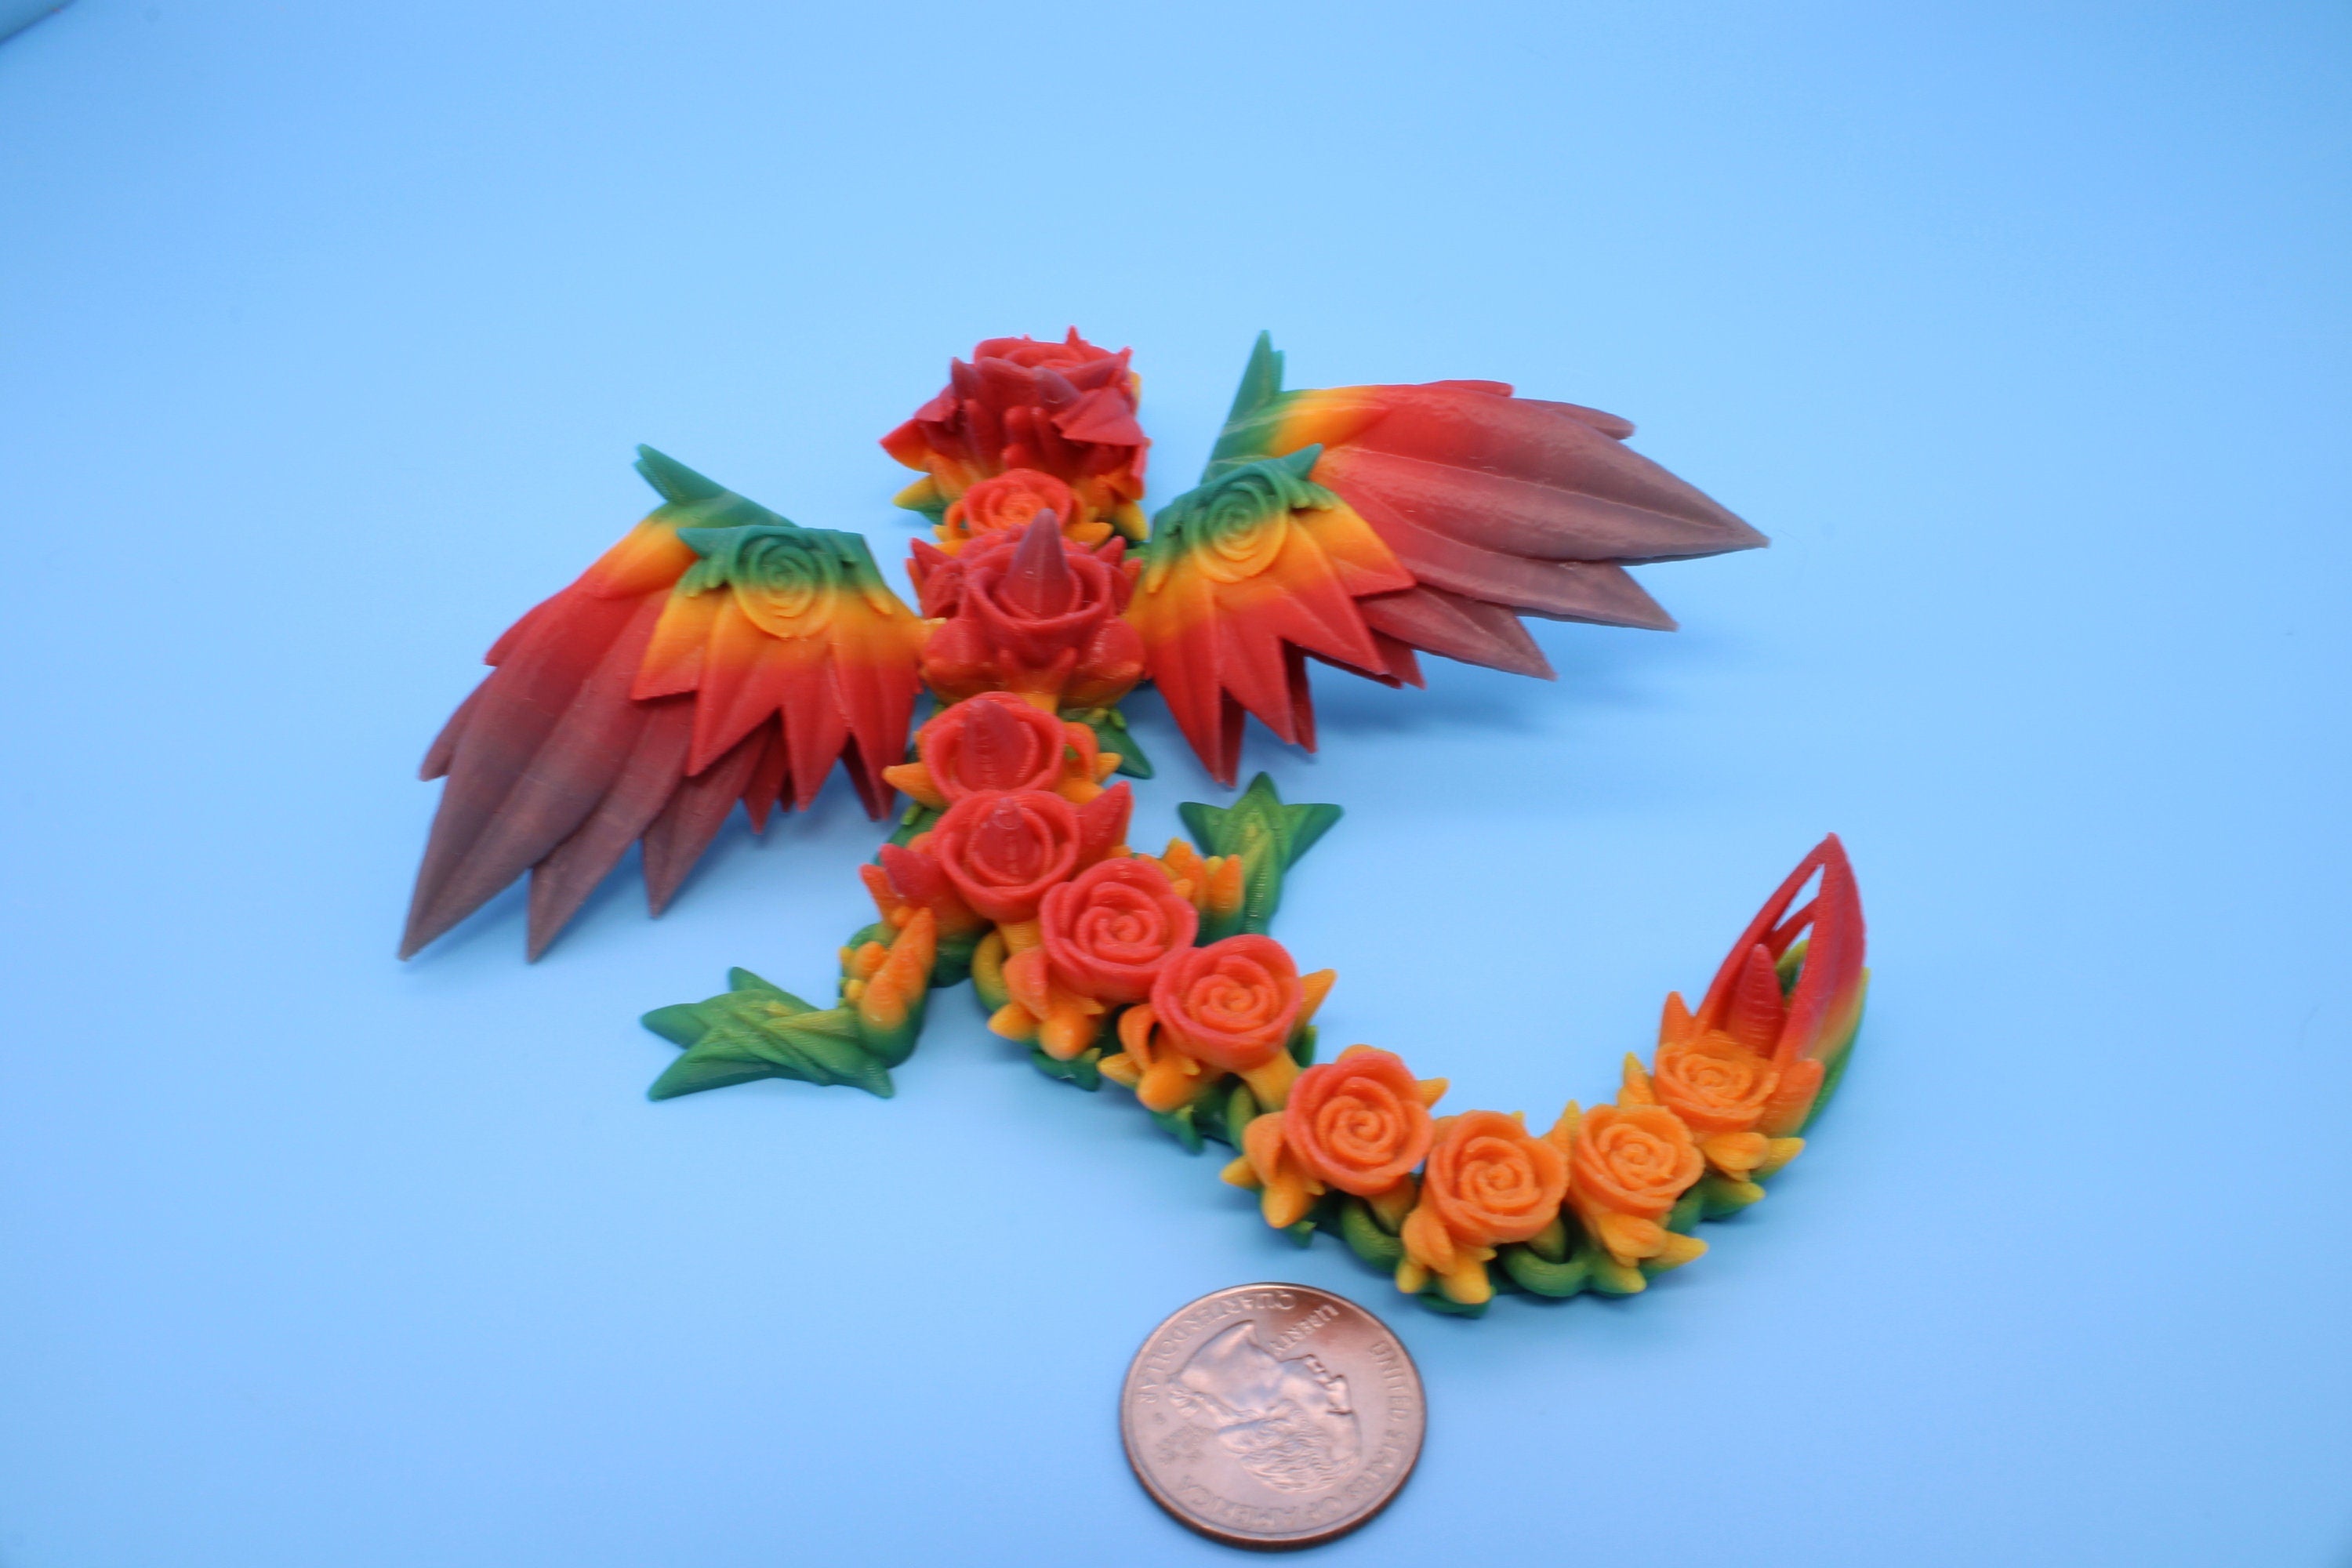 Miniature Baby Rose Wing Dragon | Rainbow | 3D printed articulating Toy Fidget | Flexi Toy 8.5 in. head to tail | Stress Relief Gift